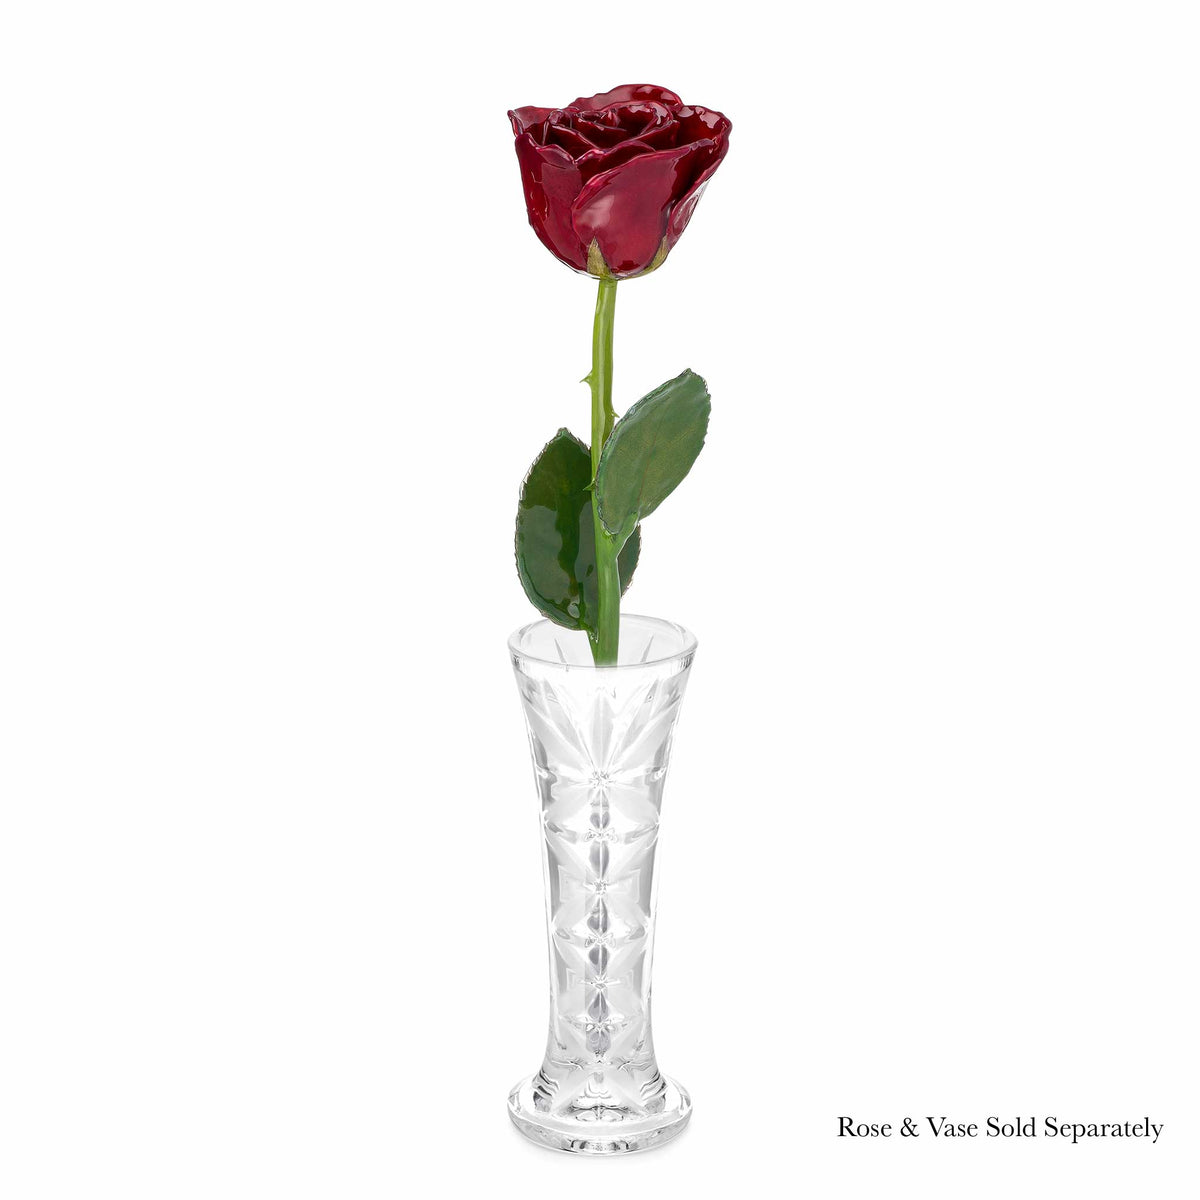 Natural (Green Stem) Forever Rose with Deep Red, Burgundy Colored Petals. View of Stem, Leaves, and Rose Petals. This a Forever Rose without any gold or other precious metals on it. shown with optional crystal vase